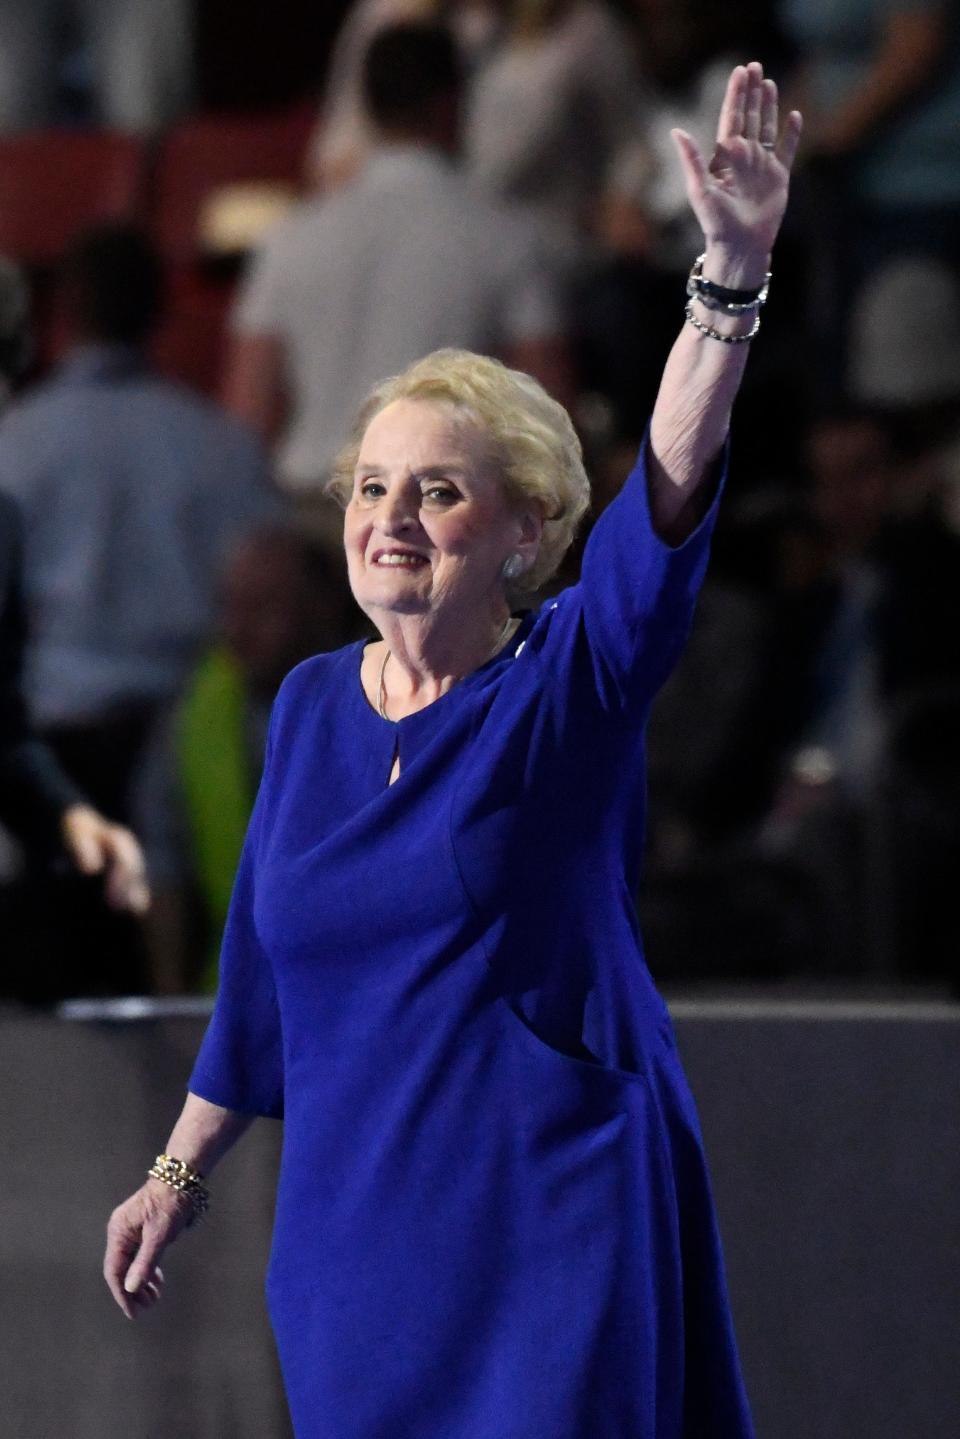 Former U.S. Secretary of State Madeleine Albright reacts to the convention goers as she makes her way on the stage during the 2016 Democratic National Convention at Wells Fargo Arena on July 26, 2016.